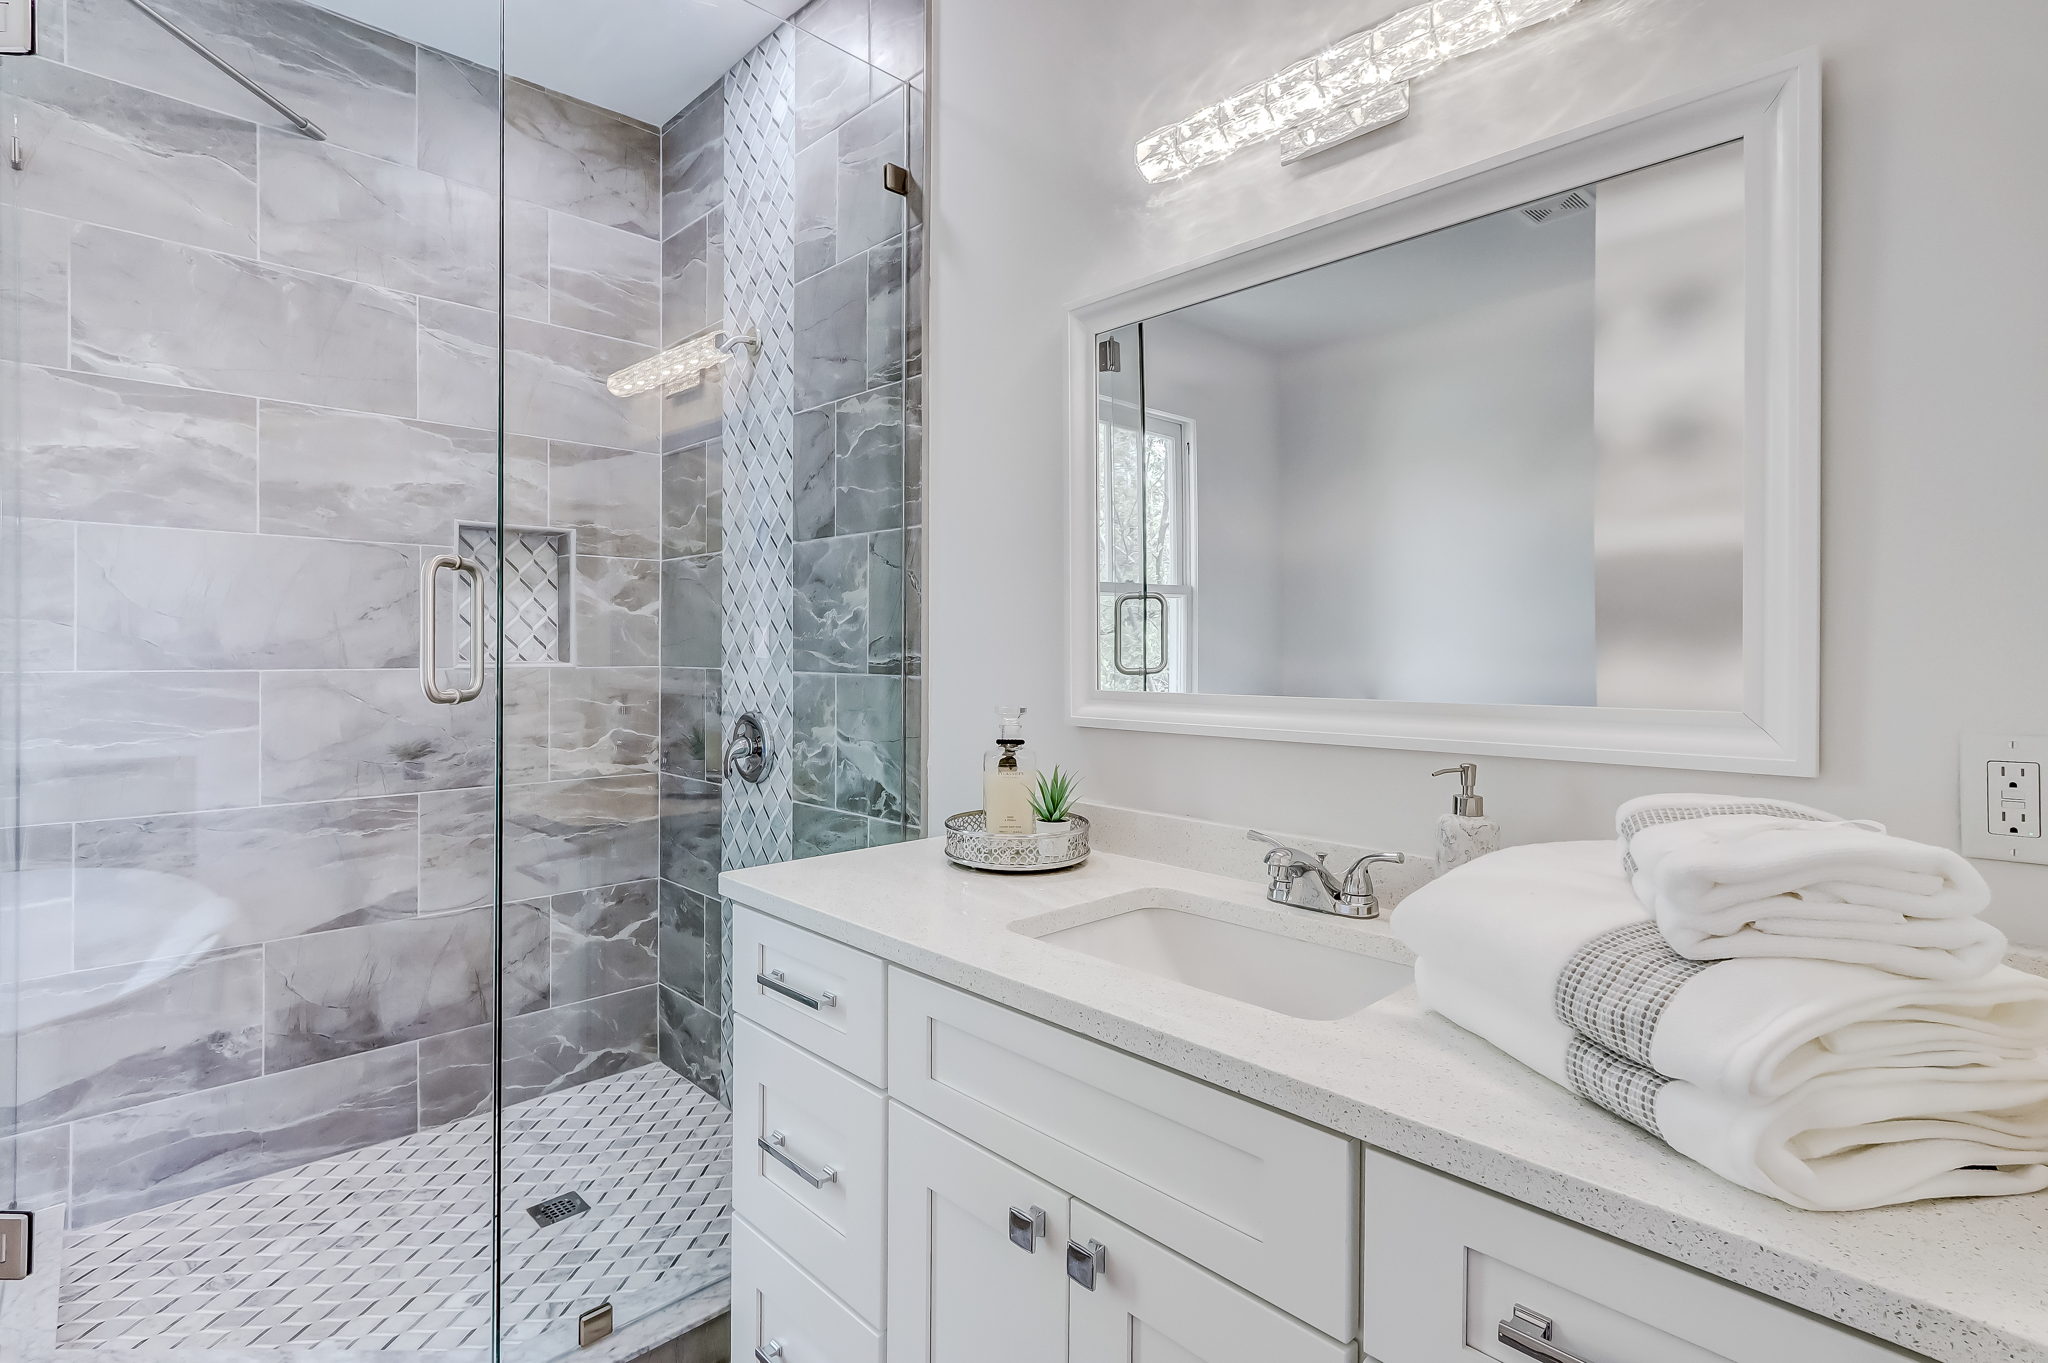 Master bath features fine finishes with wall-to-ceiling tiled shower and frameless glass door